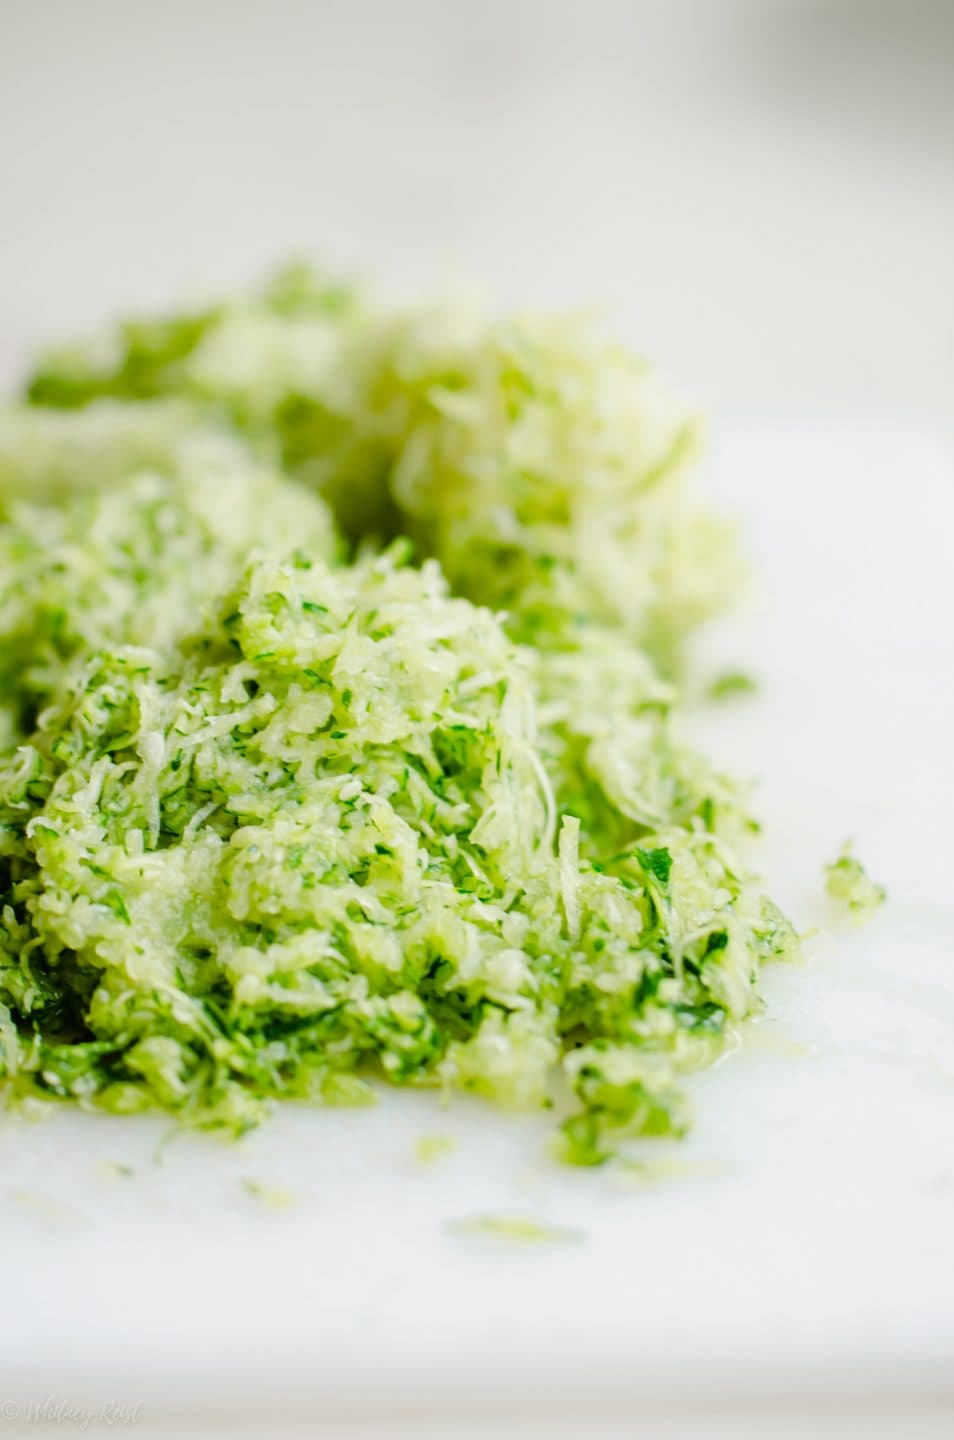 A pile of finely grated zucchini on a white cutting board.